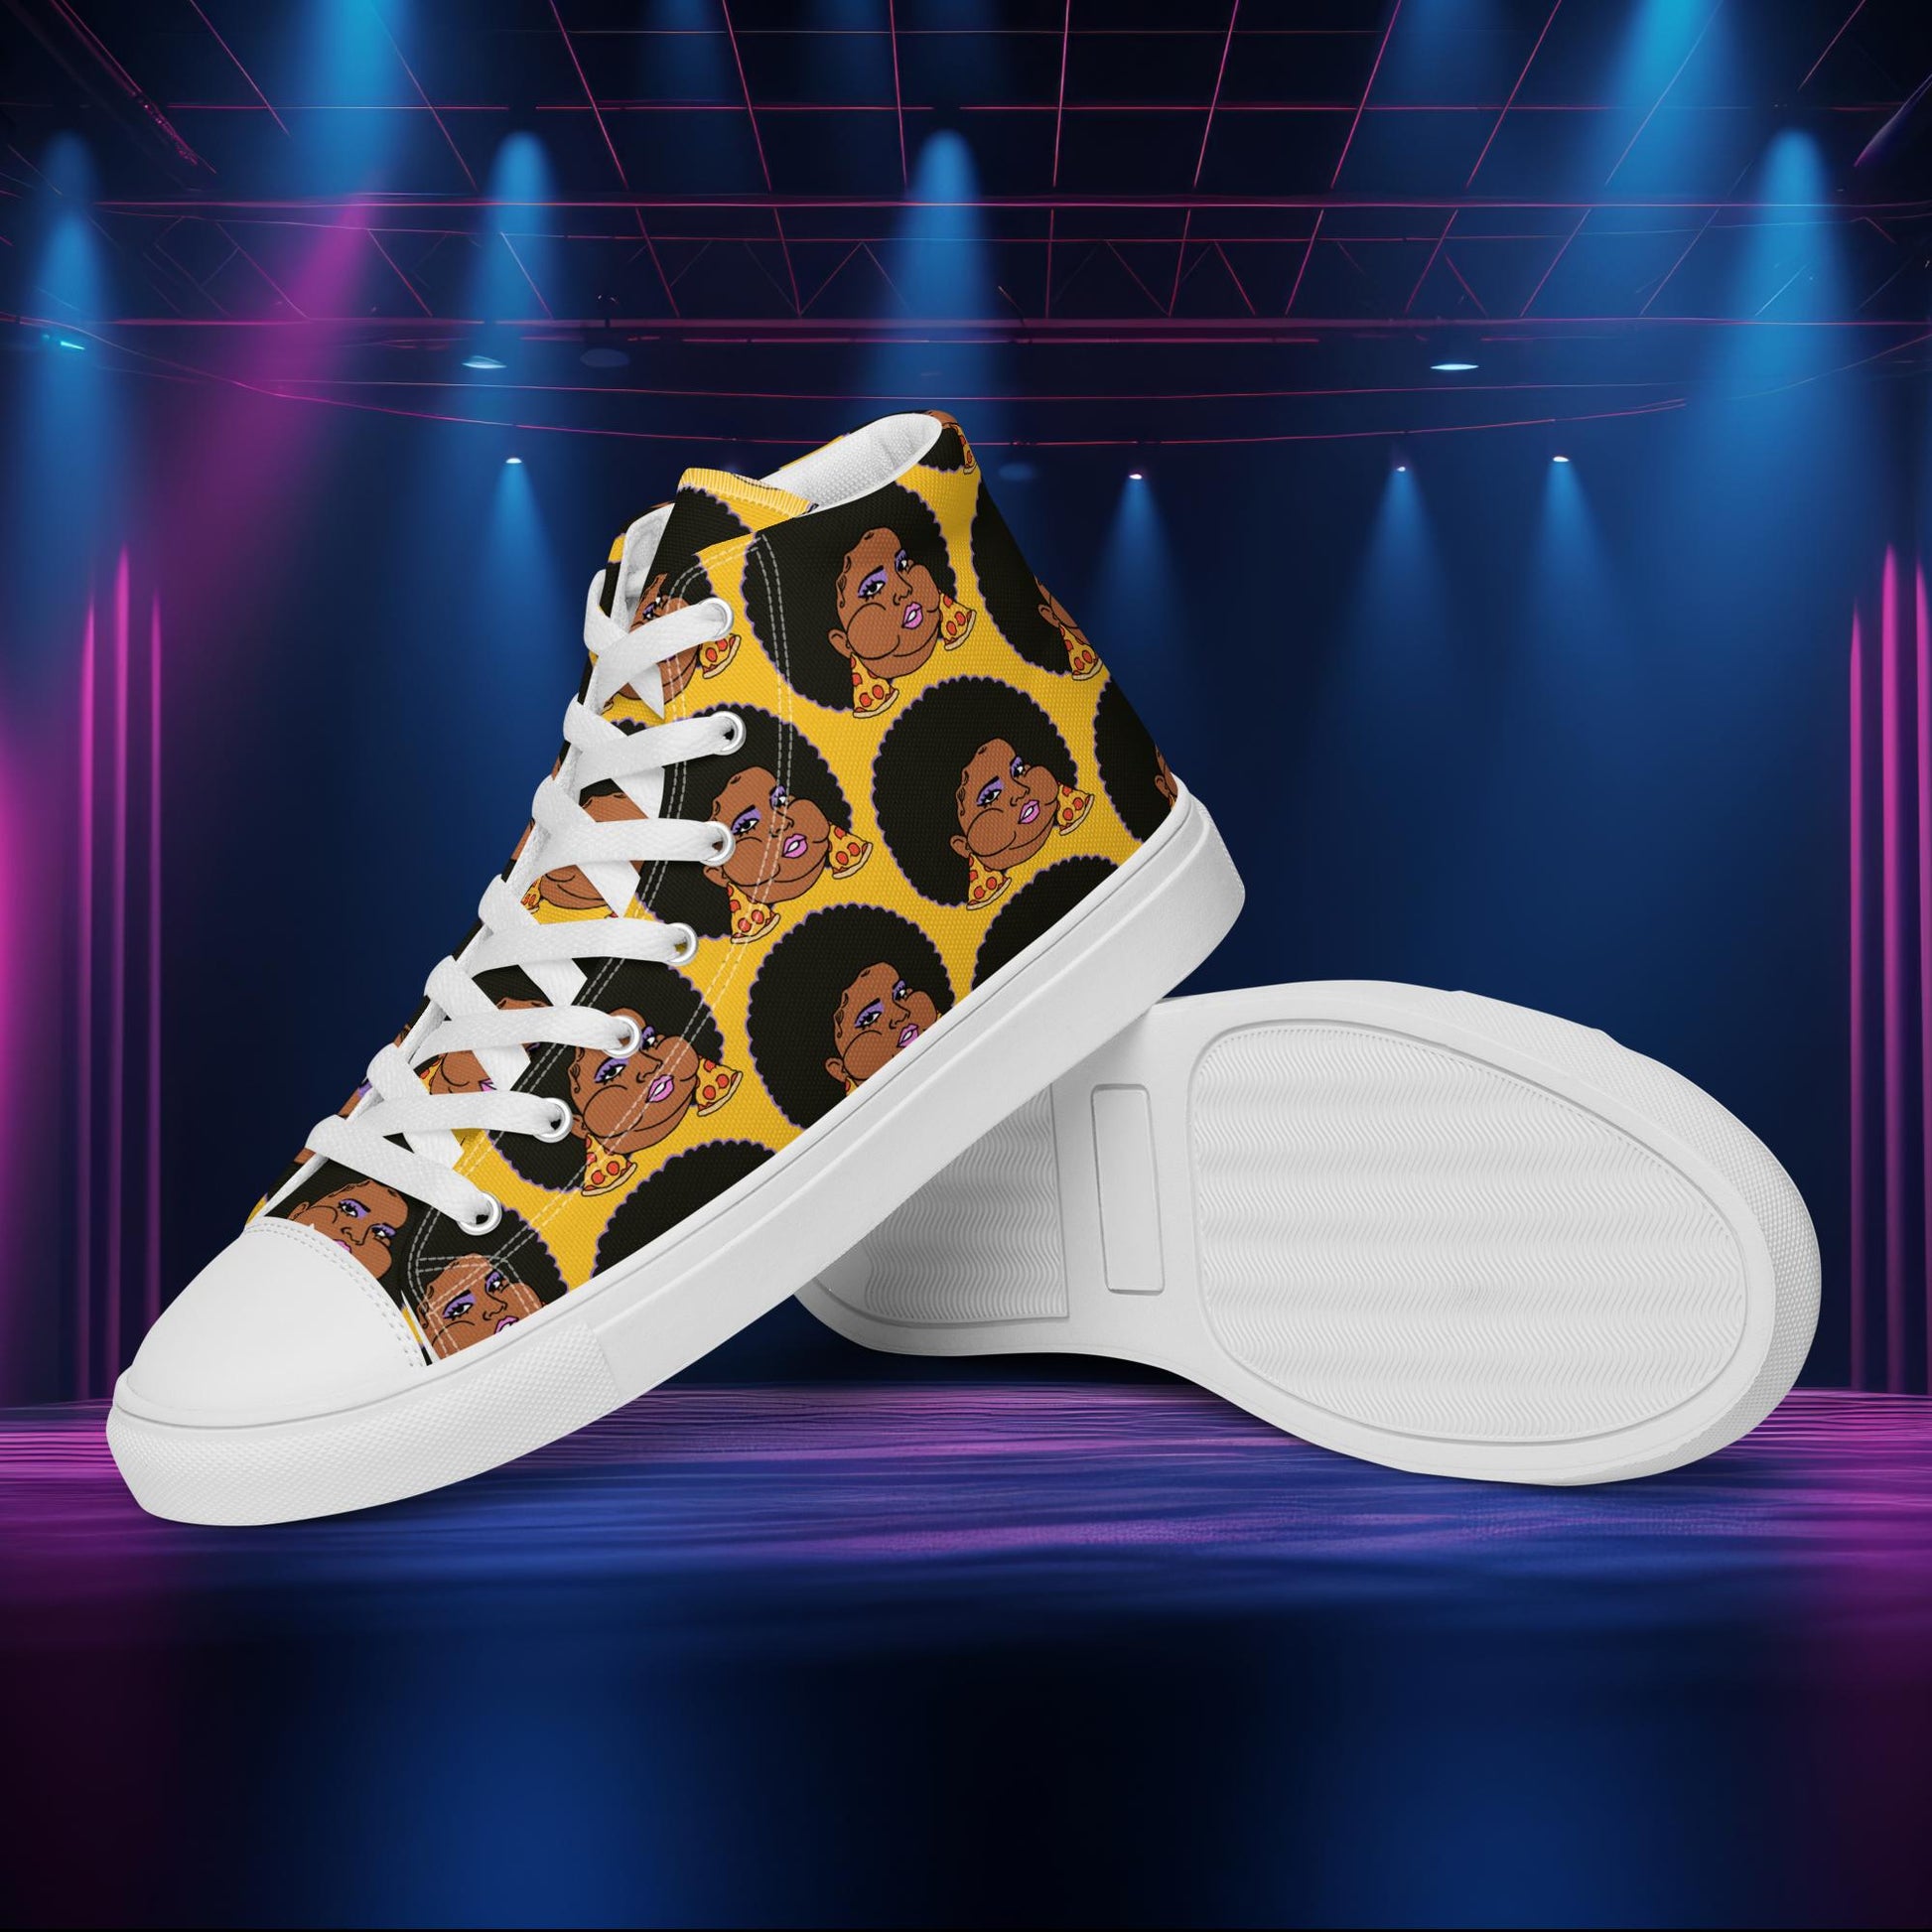 Pizzo Lizzo Pizza Lizzo Merch Lizzo Gift Song Lyrics Lizzo high top canvas shoes Next Cult Brand